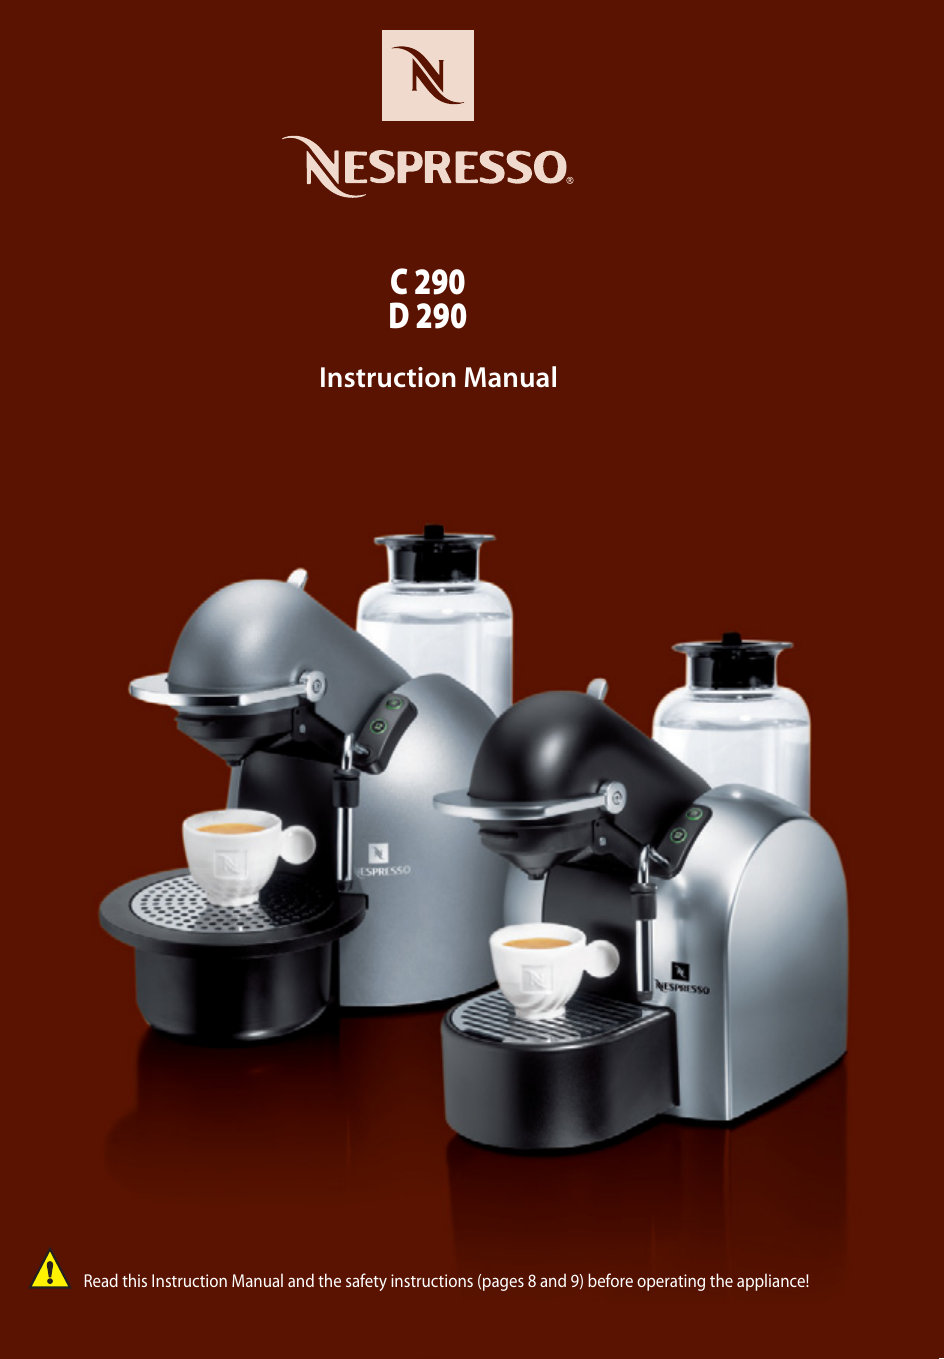 Page 1 of 10 - Nespresso D290 Www_PDF User Manual  To The 447c10b3-9031-4672-bba2-14ae723123fe